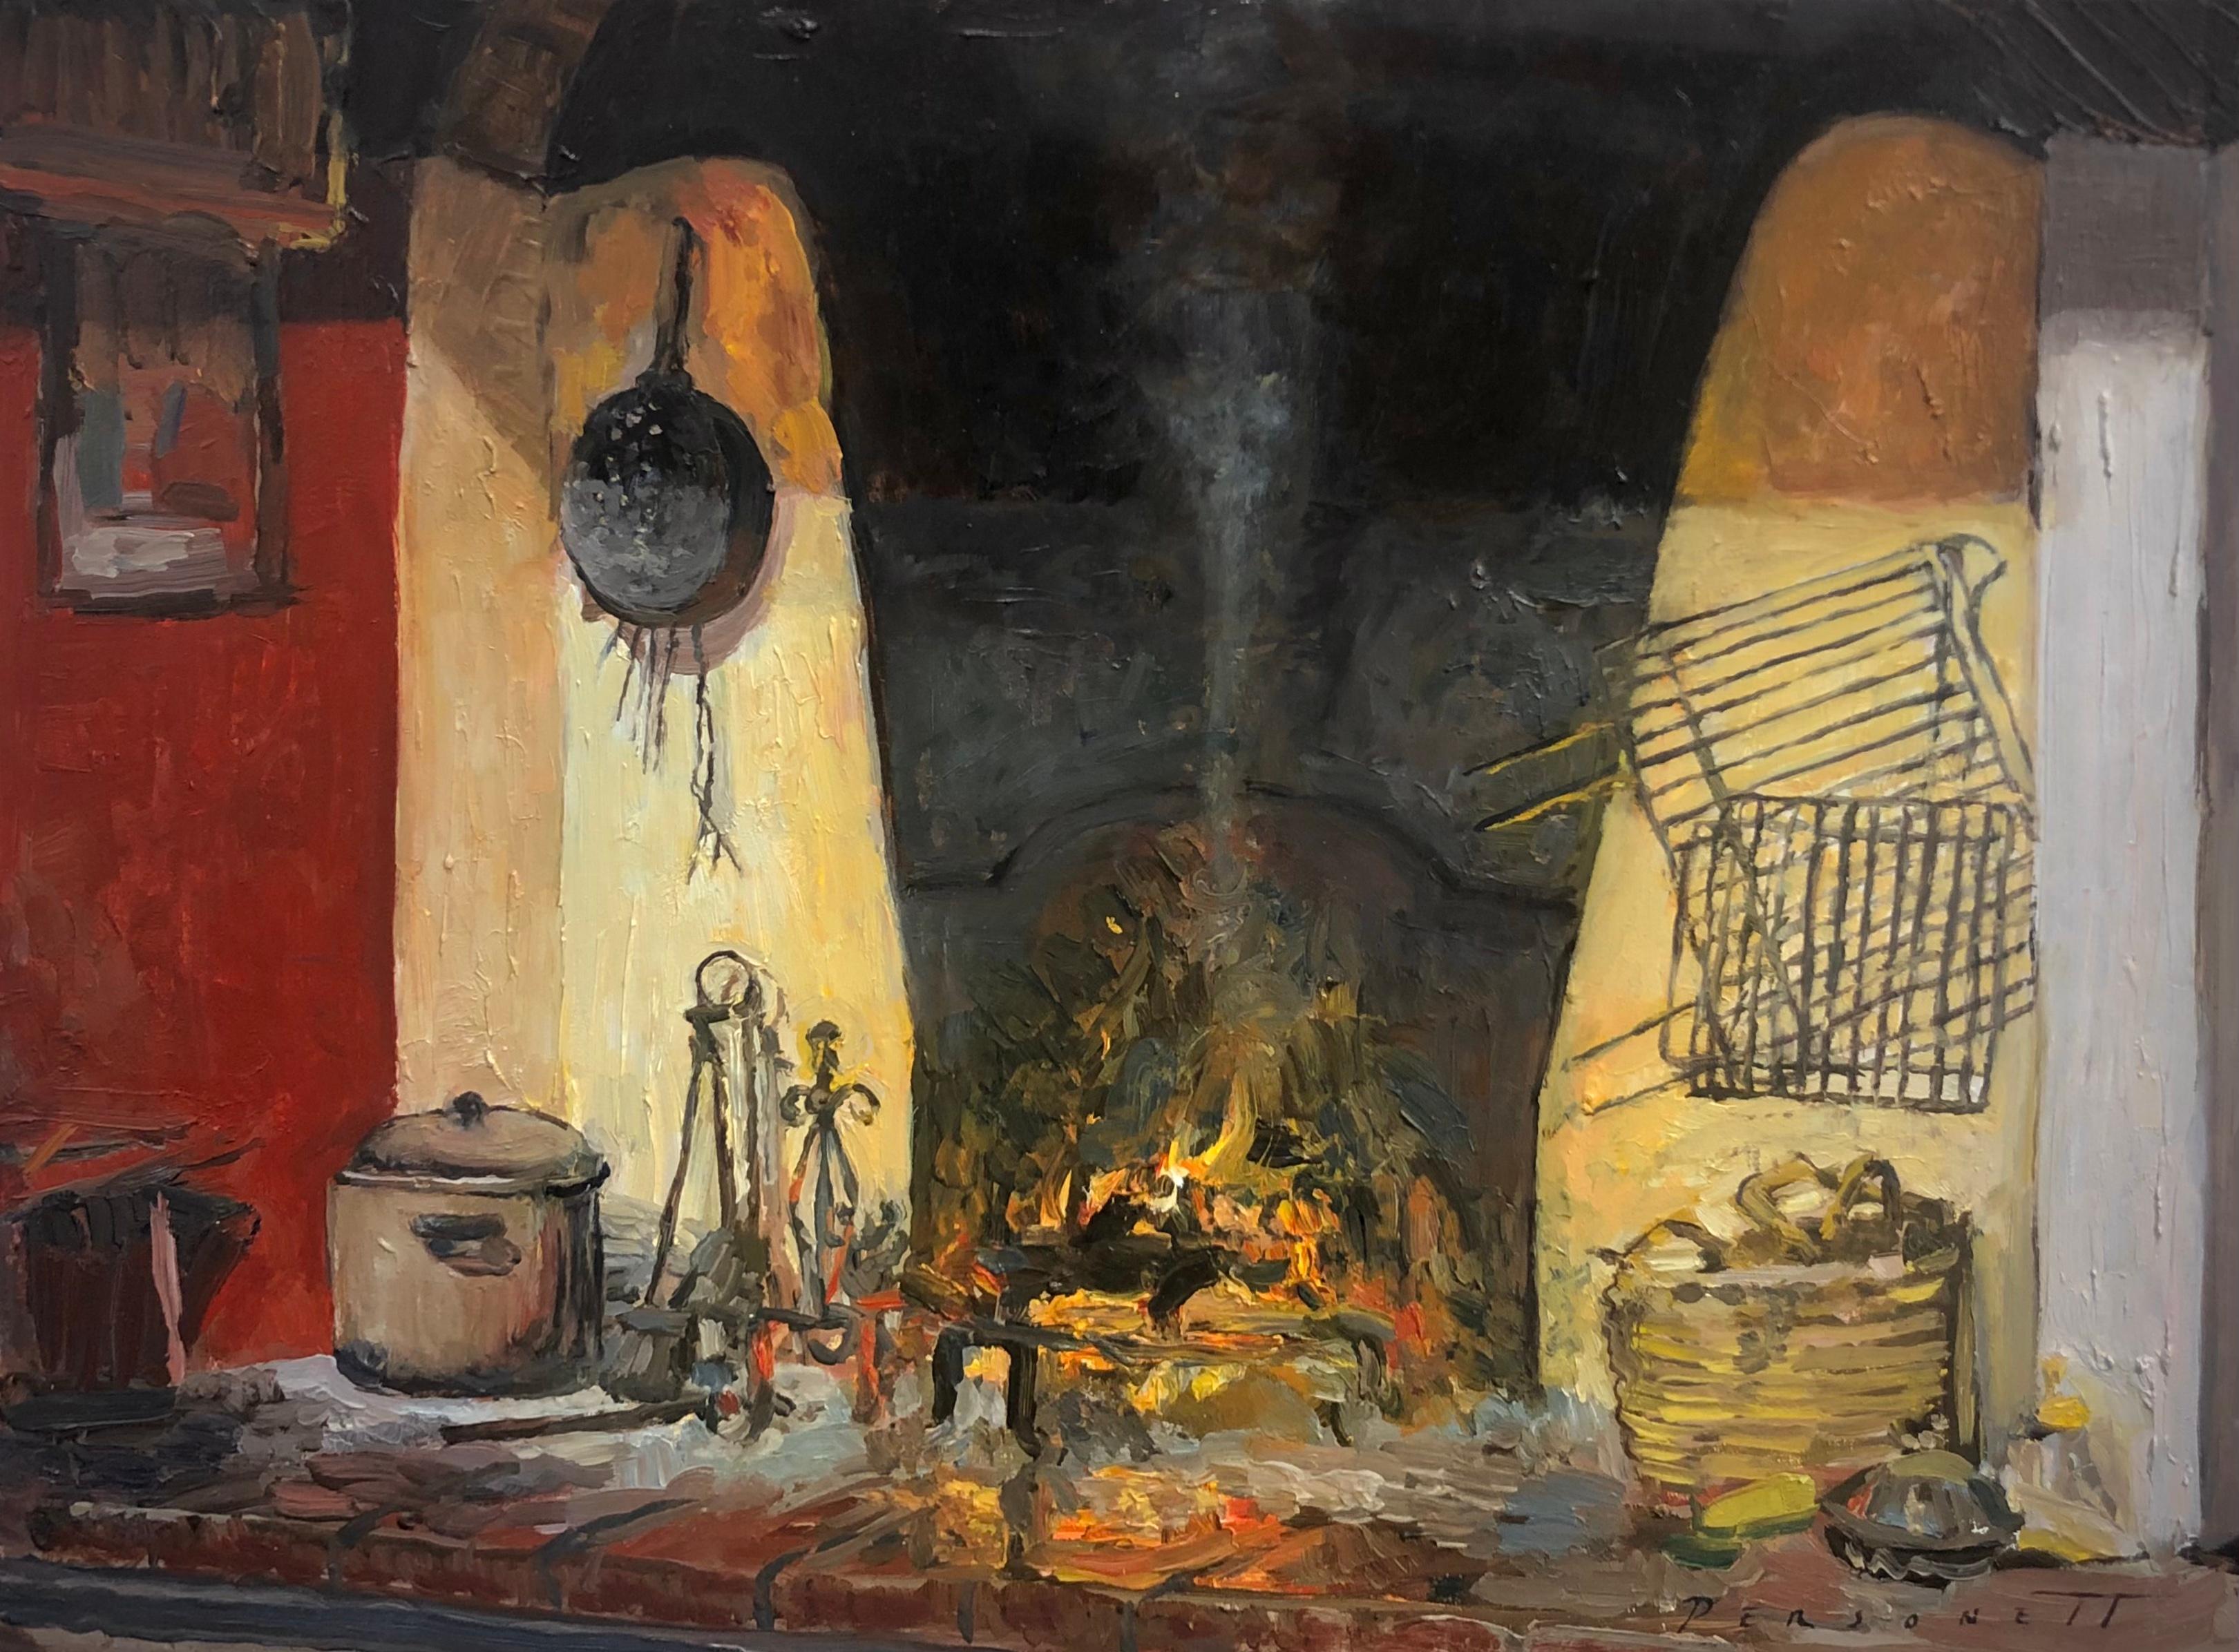 Rachel Personett Still-Life Painting - "Fenske's Fireplace" contemporary realist oil painting, warm winter tuscan vibes